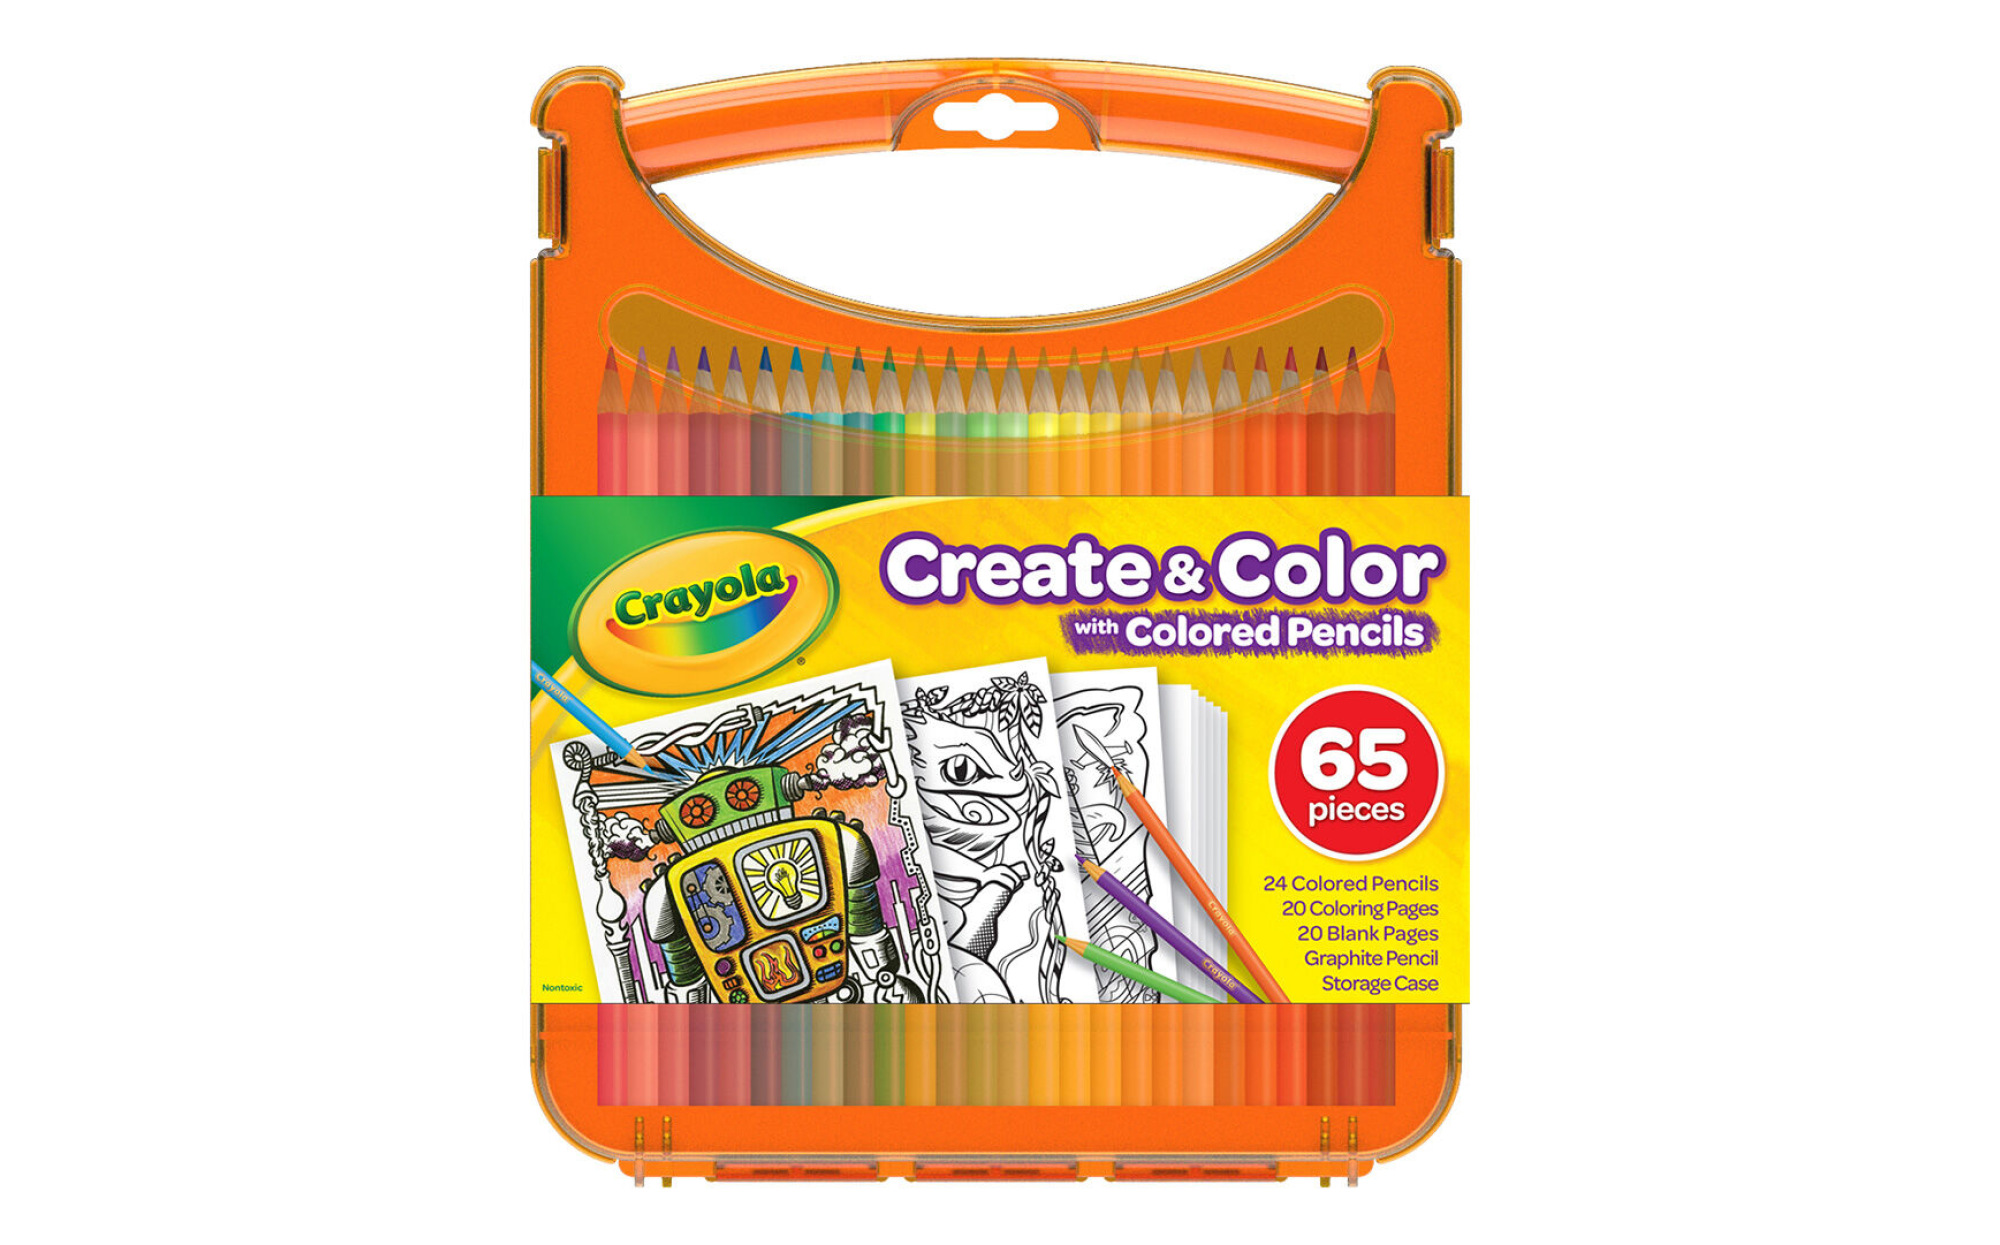 NEW from Crayola: Artist Colored Pencils 